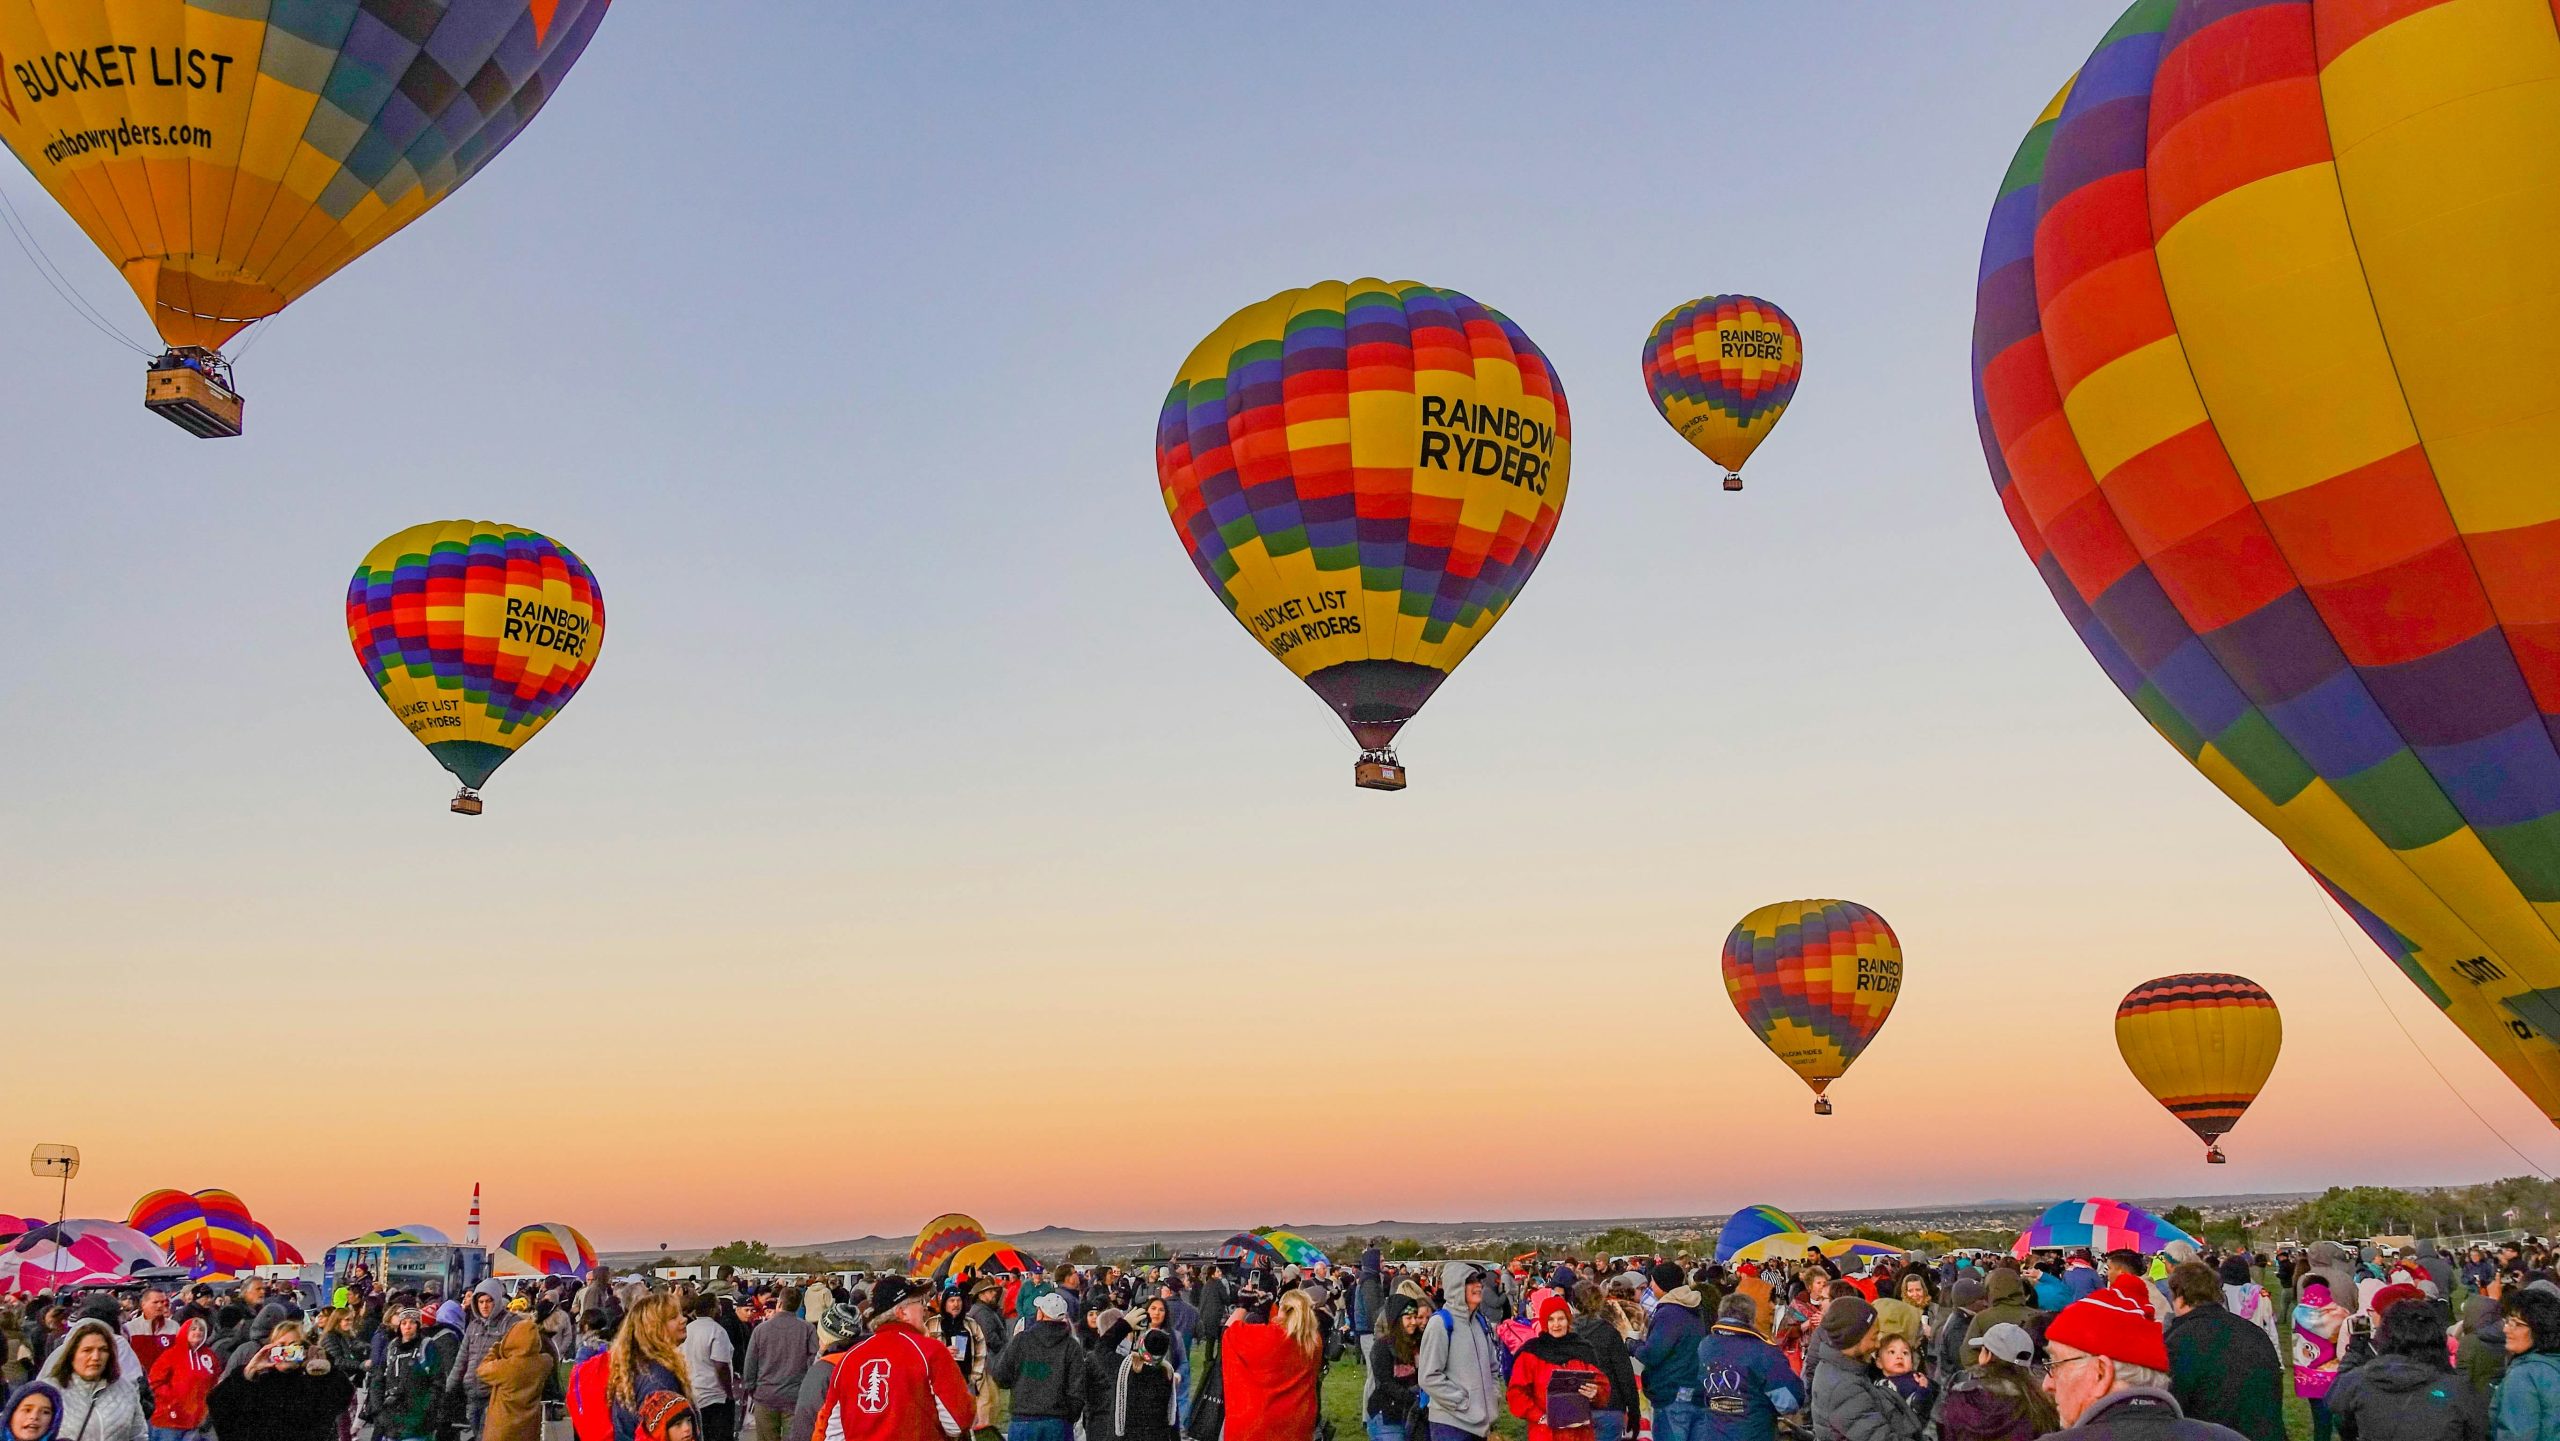 Hot Air Balloons over a festival in Albuquerque, United States